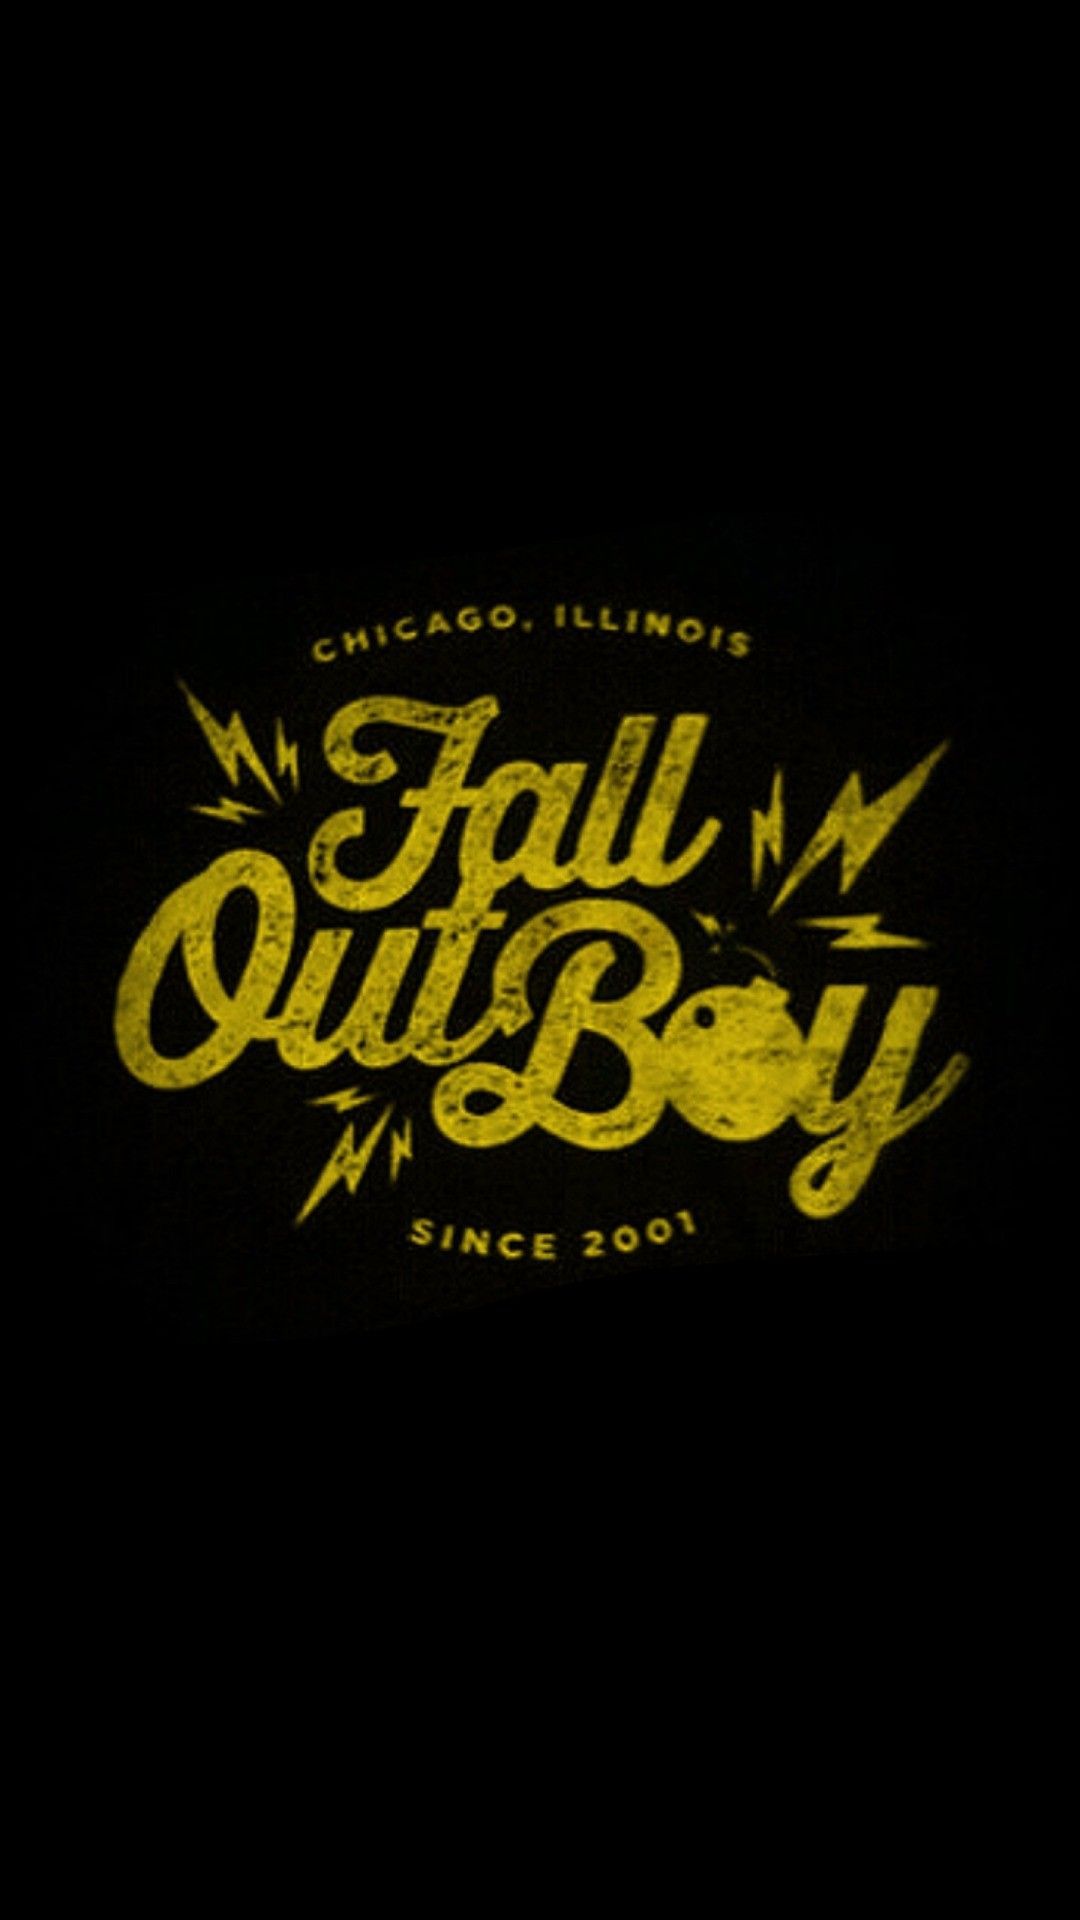 Image Result For Fall Out Boy Mania Iphone Wallpaper Fall Out Boy 壁紙 Hd Wallpaper Backgrounds Download